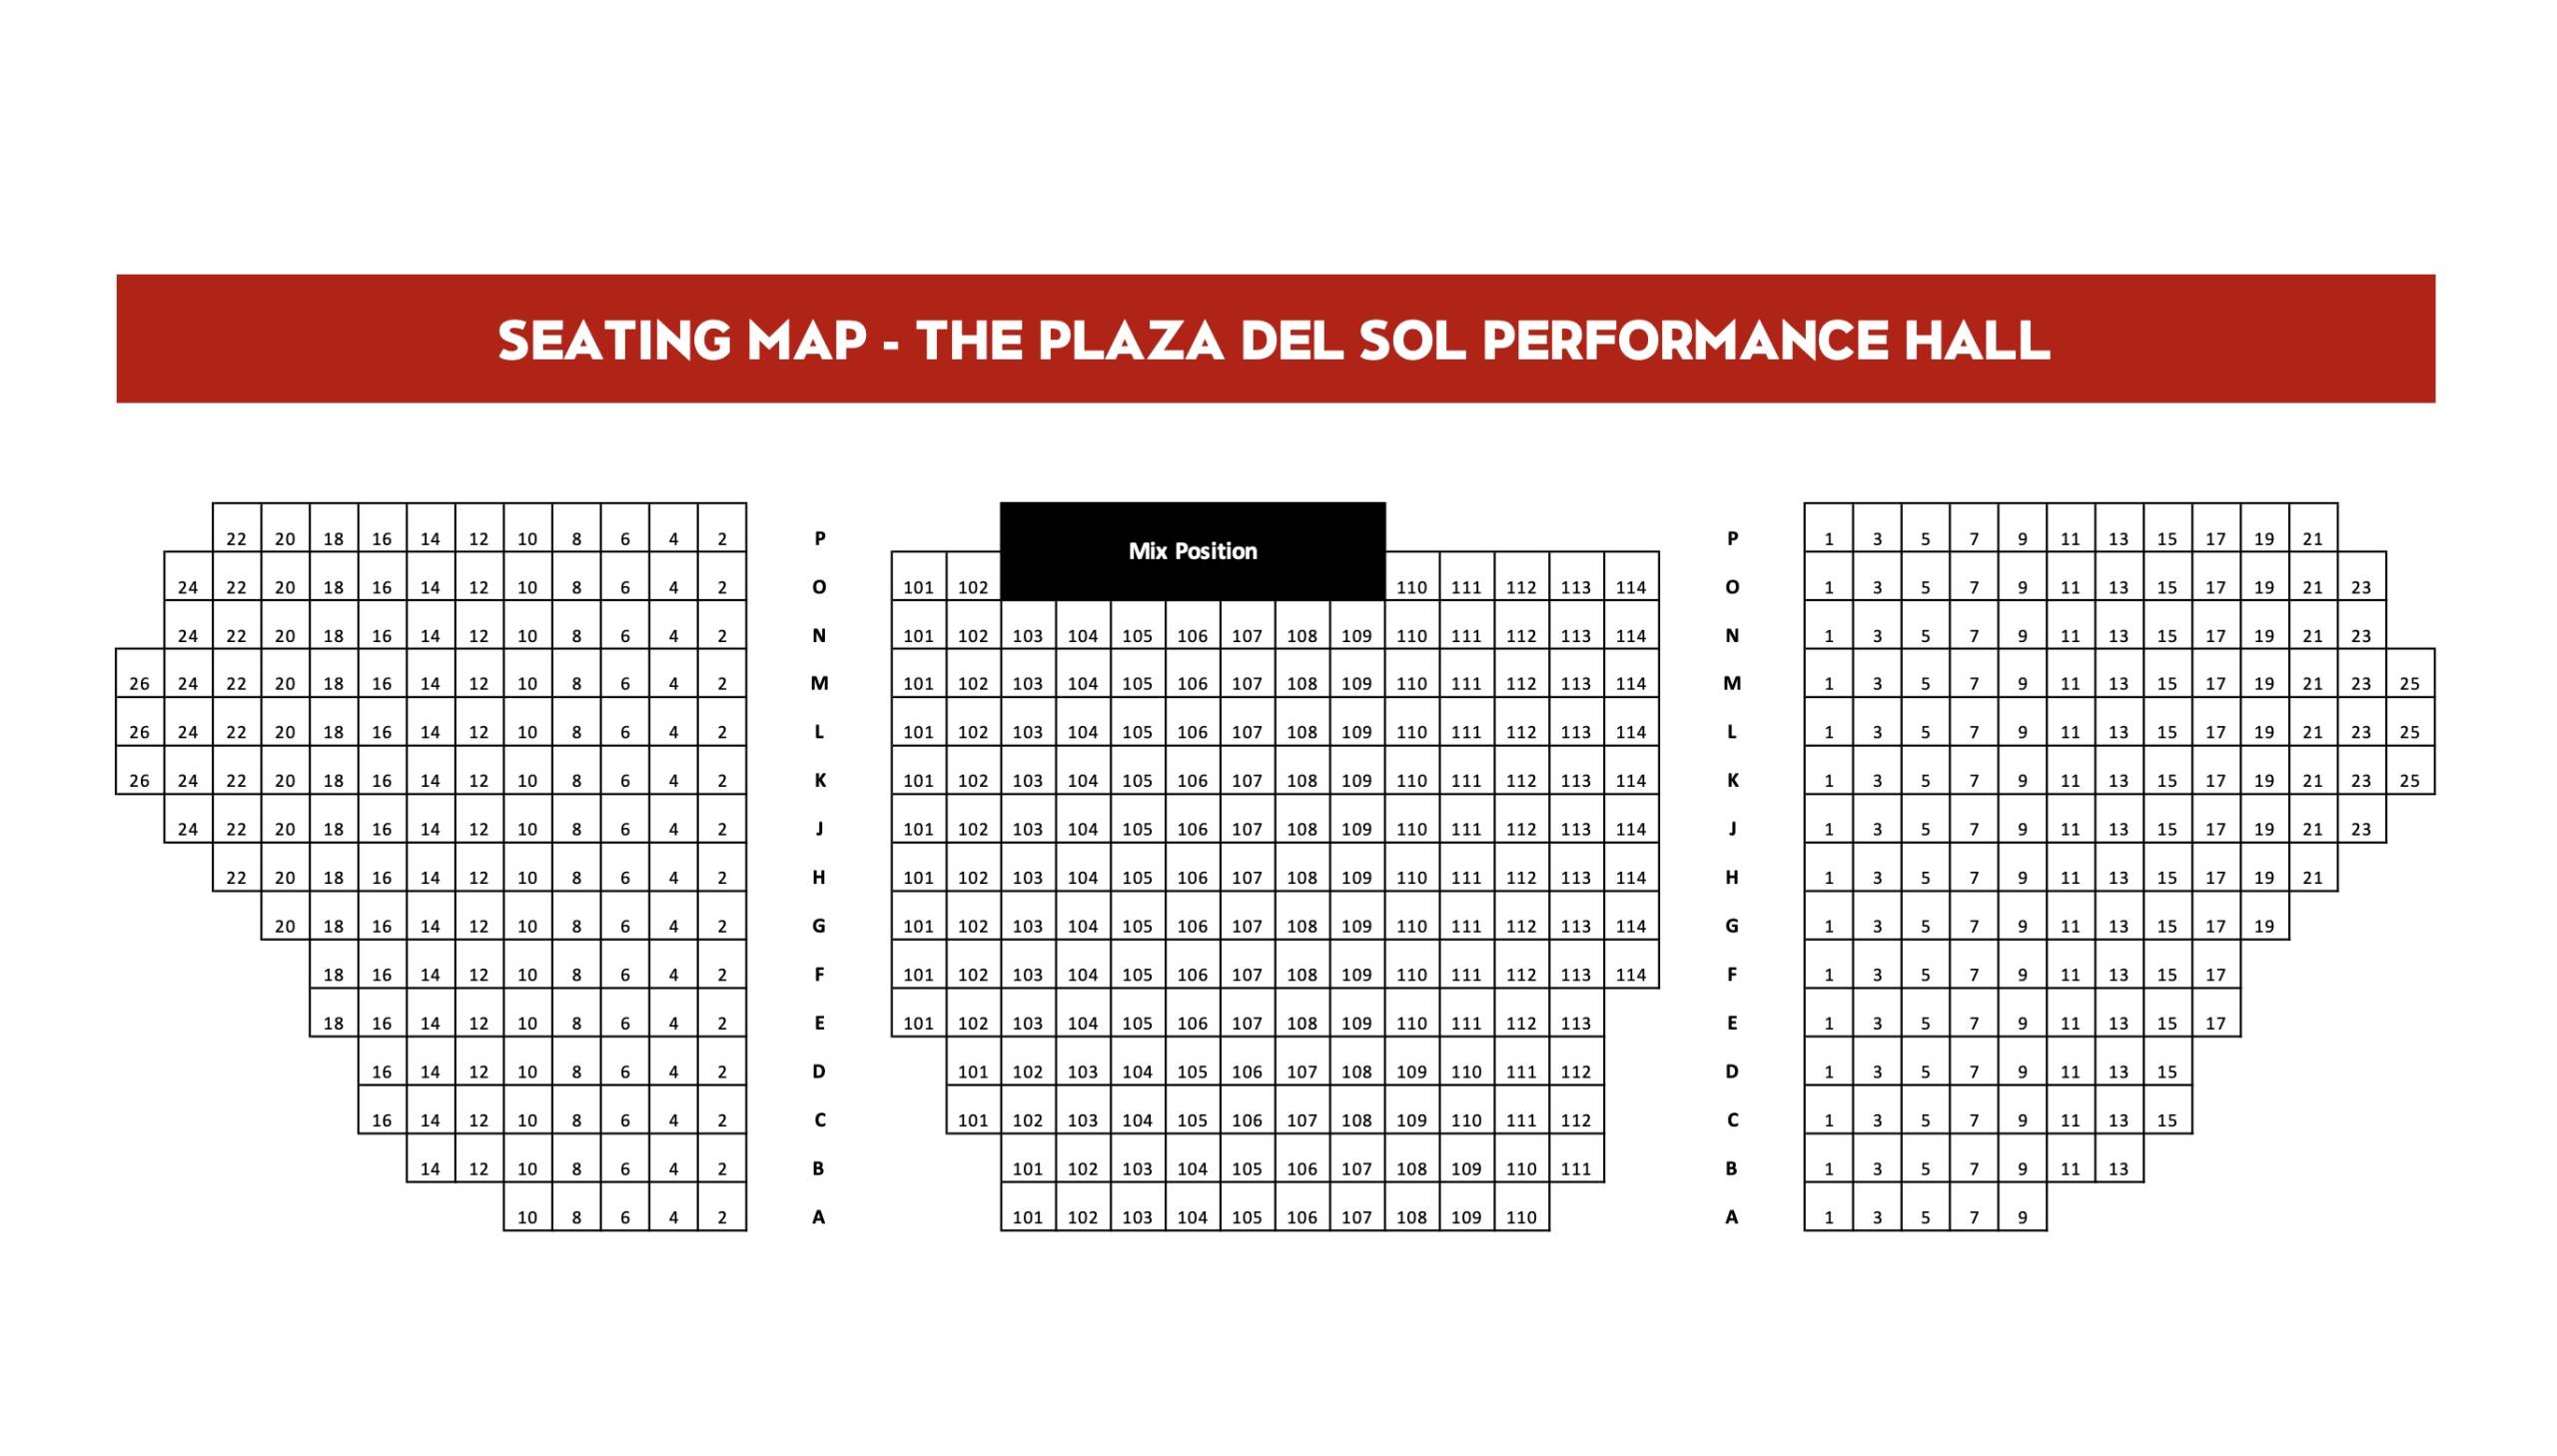 Seating Map - The Plaza del Sol Performance Hall